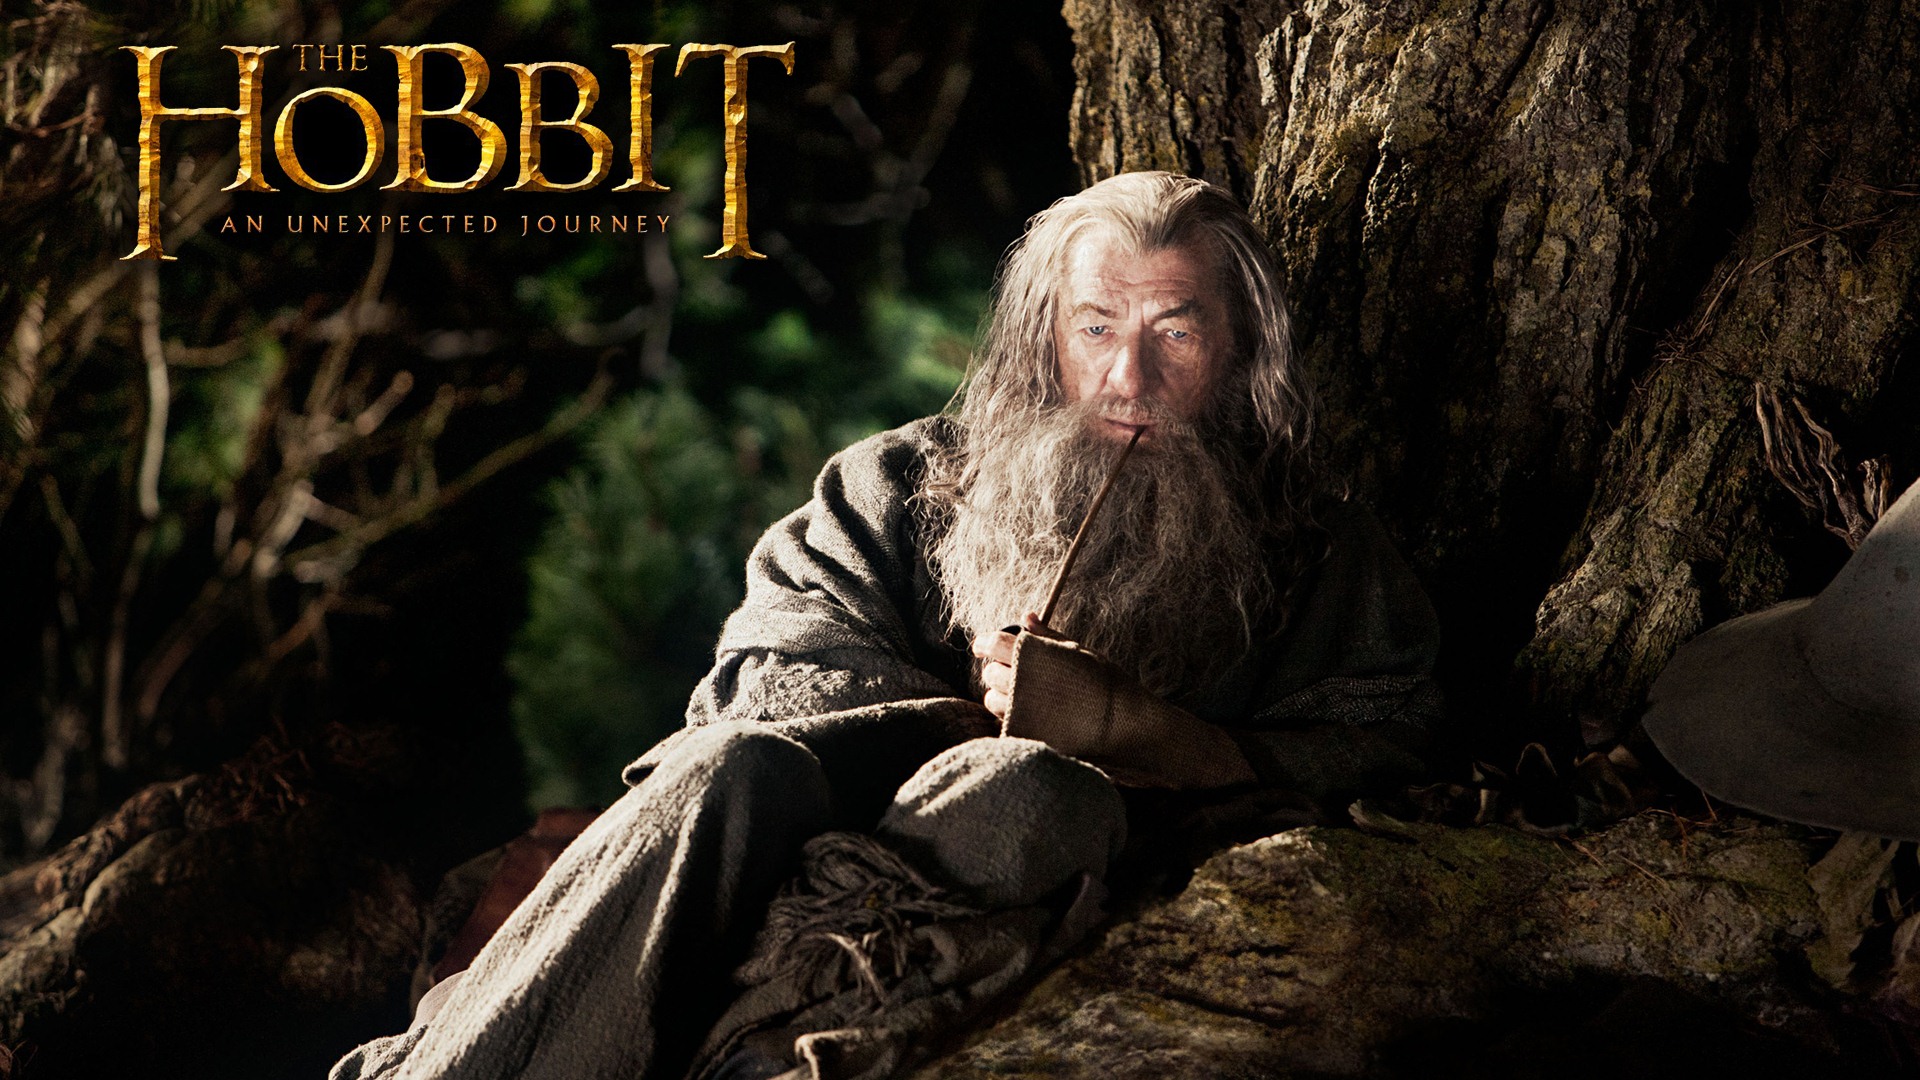 The Hobbit: An Unexpected Journey HD wallpapers #10 - 1920x1080